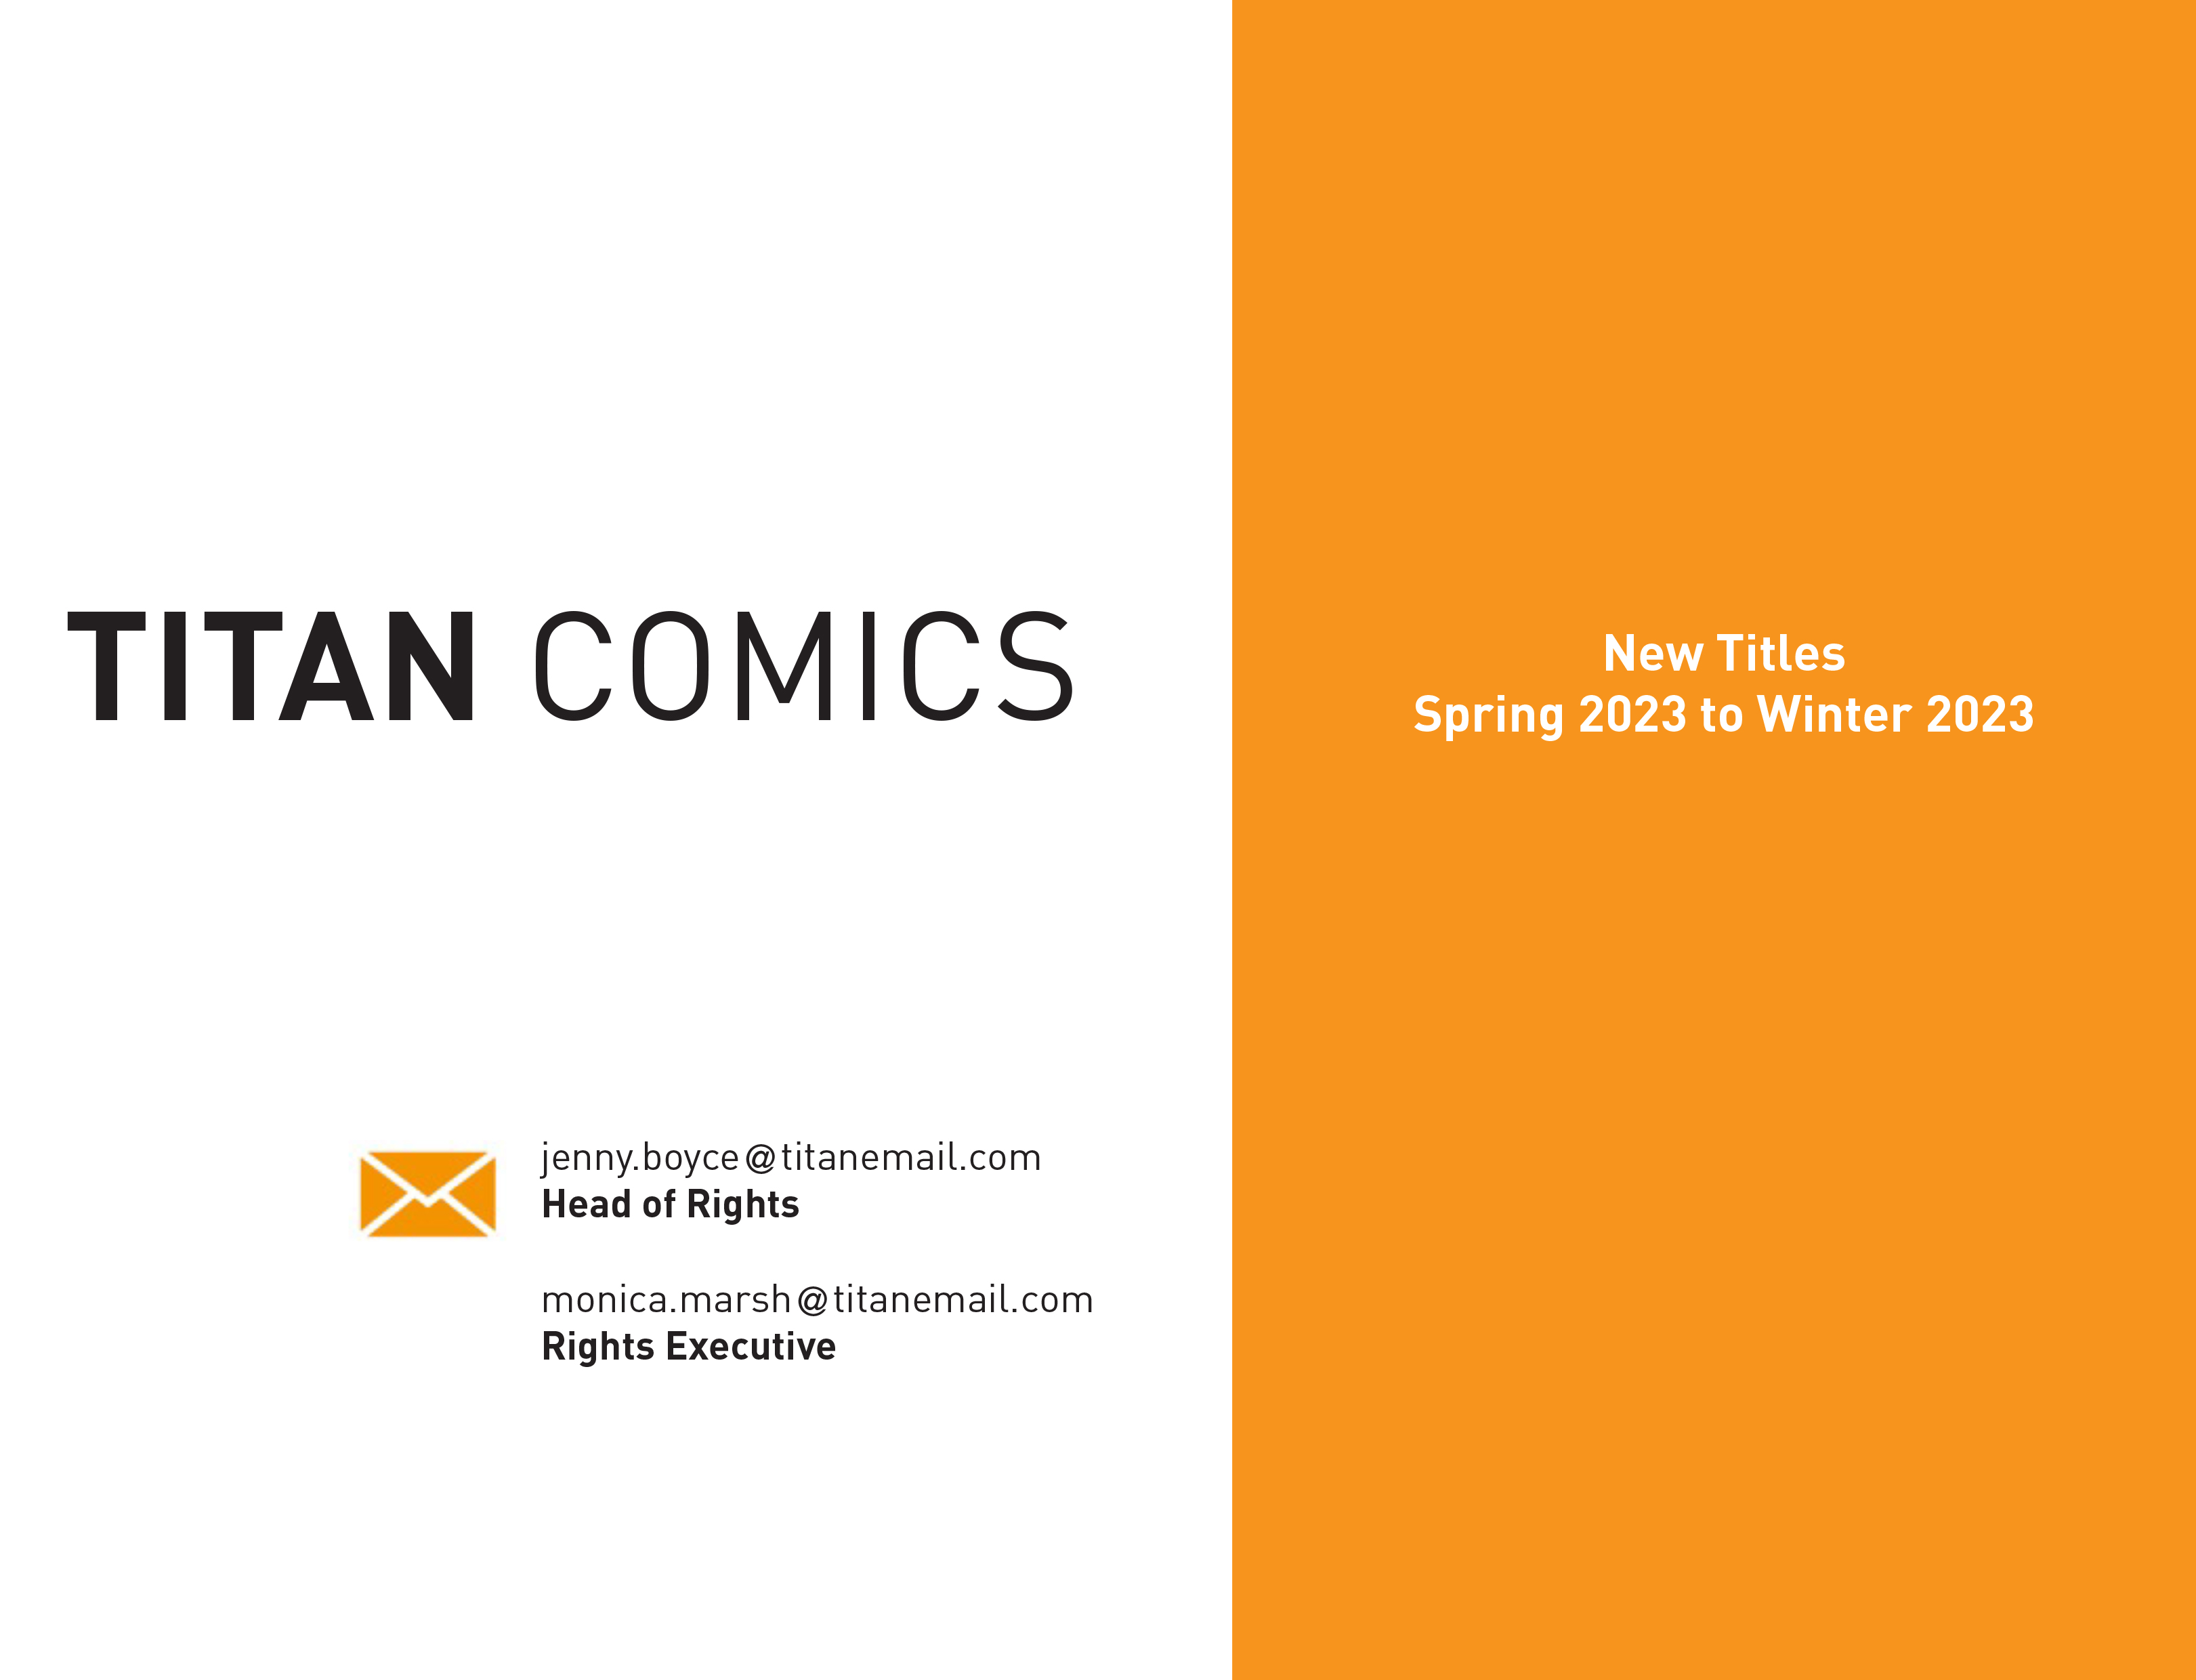 [Preview Image for Titan Comics New Titles 2023]